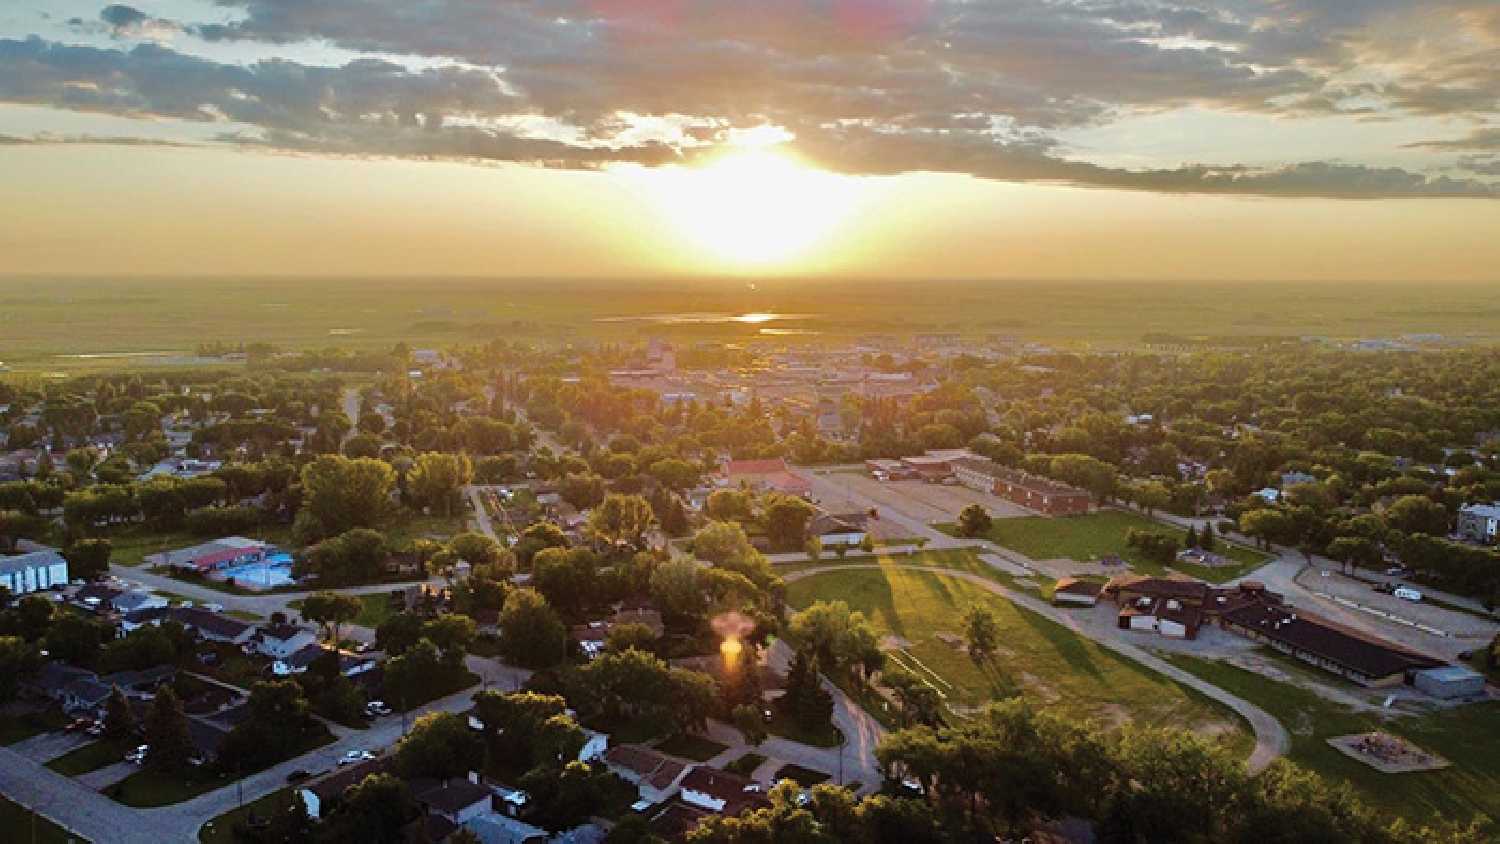 The Town of Moosomin will be participating in this year’s Communities in Bloom contest. The competition focuses on the quality of municipalities’ green spaces, diversity and originality of its landscape, as well community projects that highlight environmental awareness and heritage within the area. <b>Photo:</b> Editor Kevin Weedmark took a drone shot of a sunrise in Moosomin last summer.